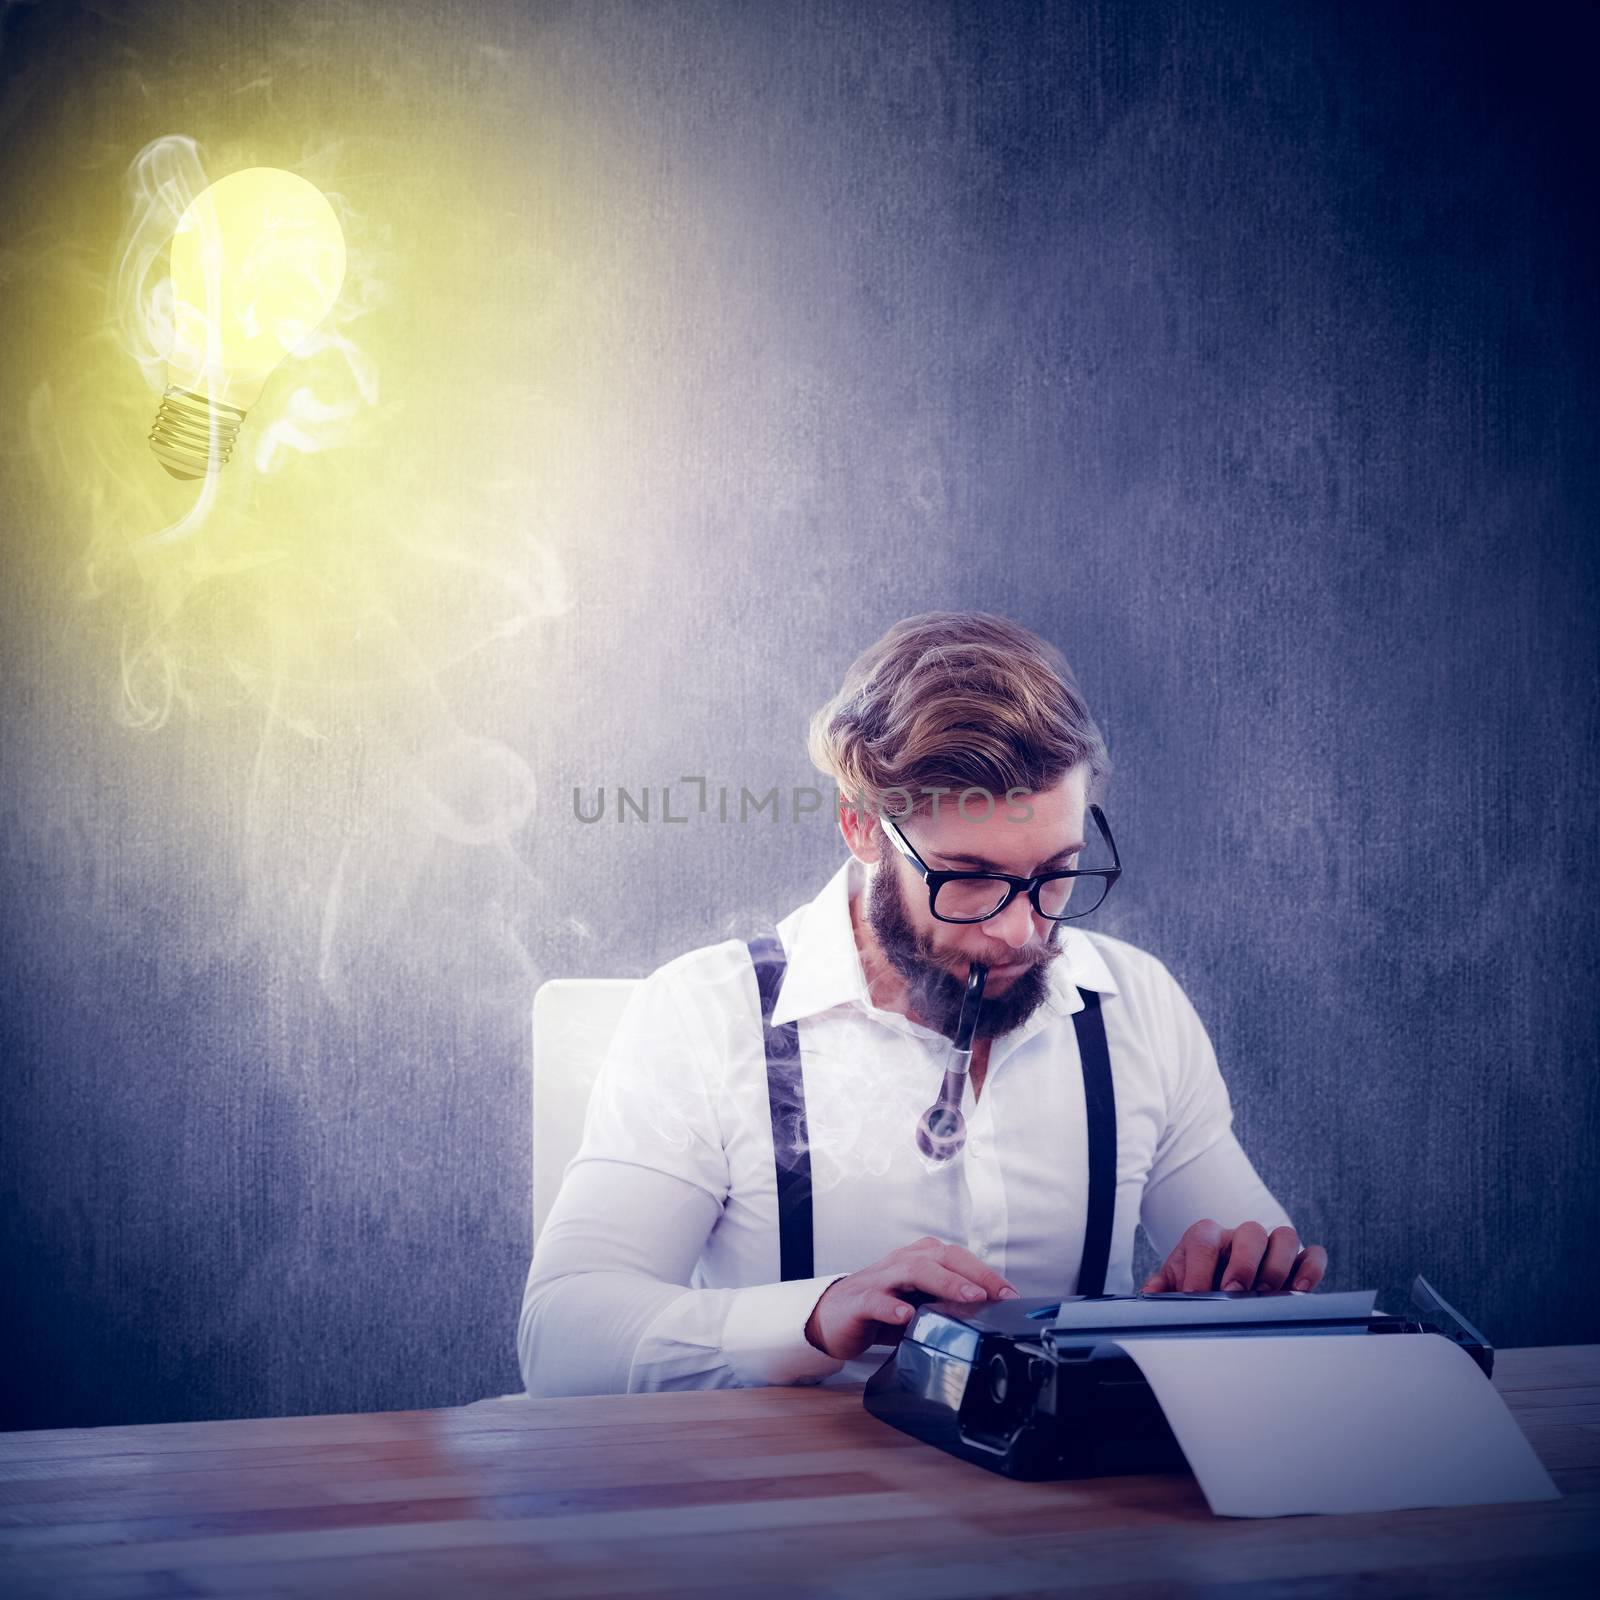 Hipster smoking pipe while working on typewriter against white and grey background